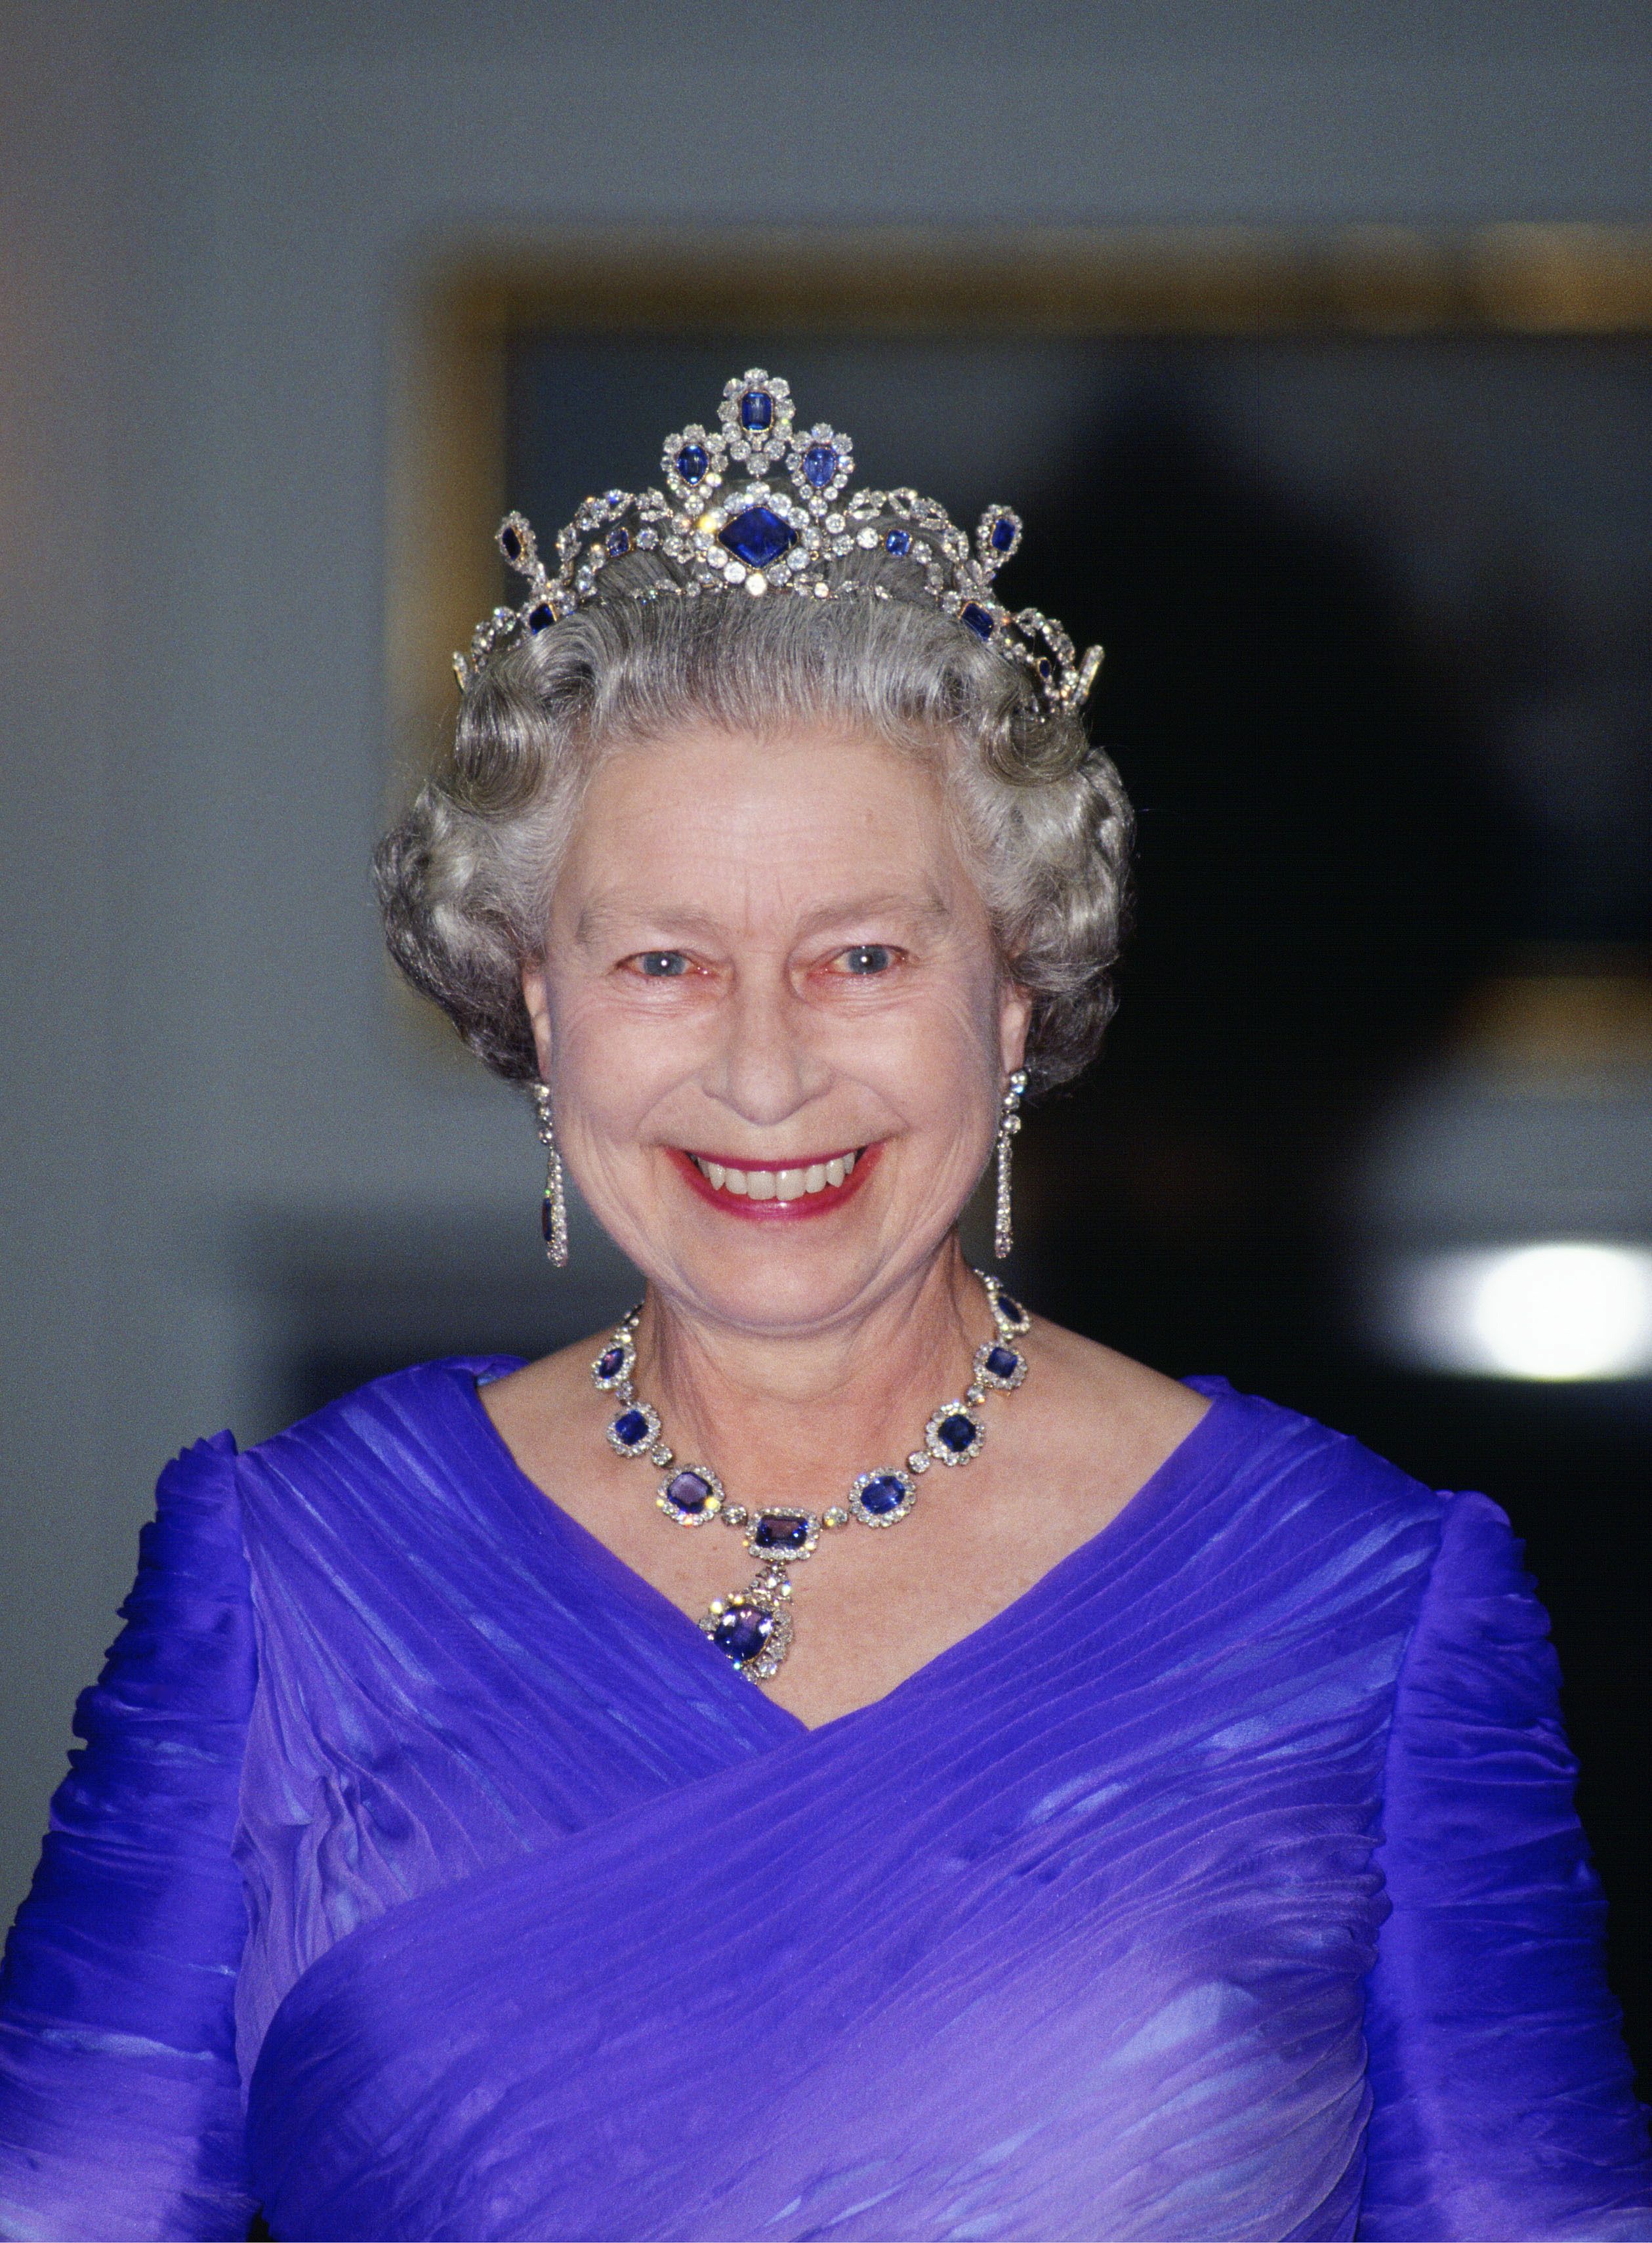 The Belgian Sapphire Tiara: A Priceless Gem with a Scandalous History